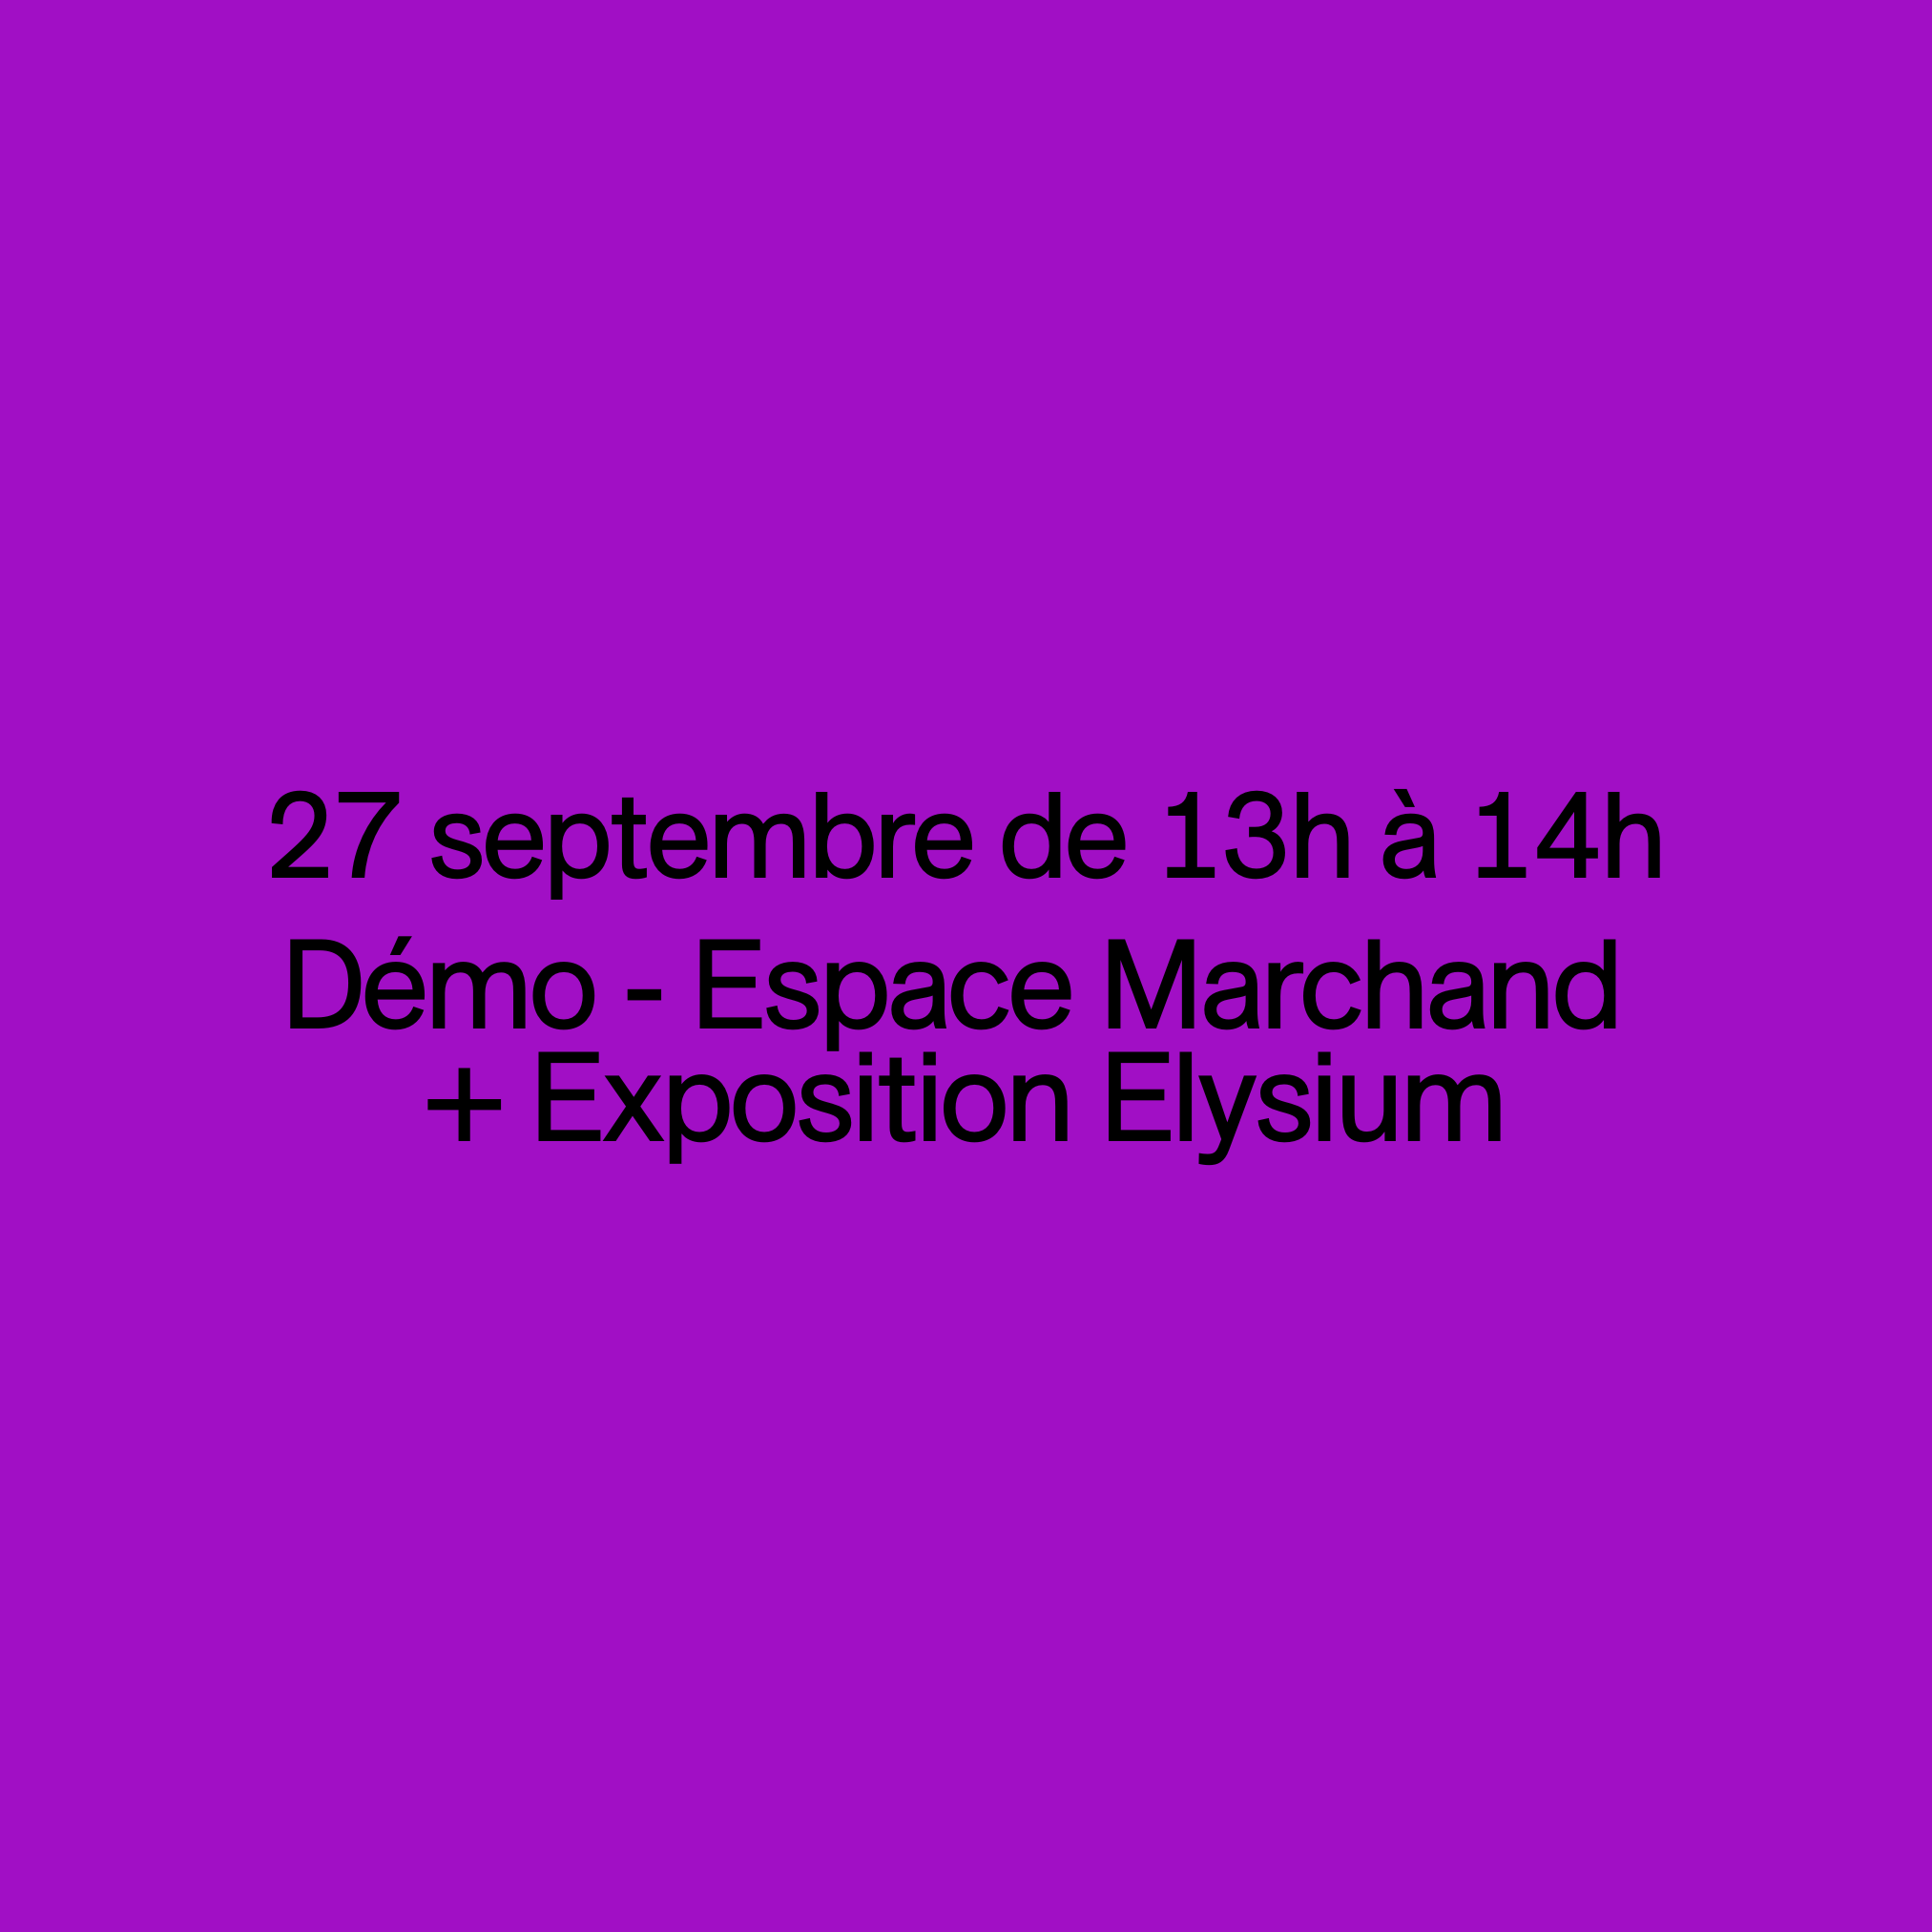 Demonstrations in the exhibitor area + exhibition of Elysium